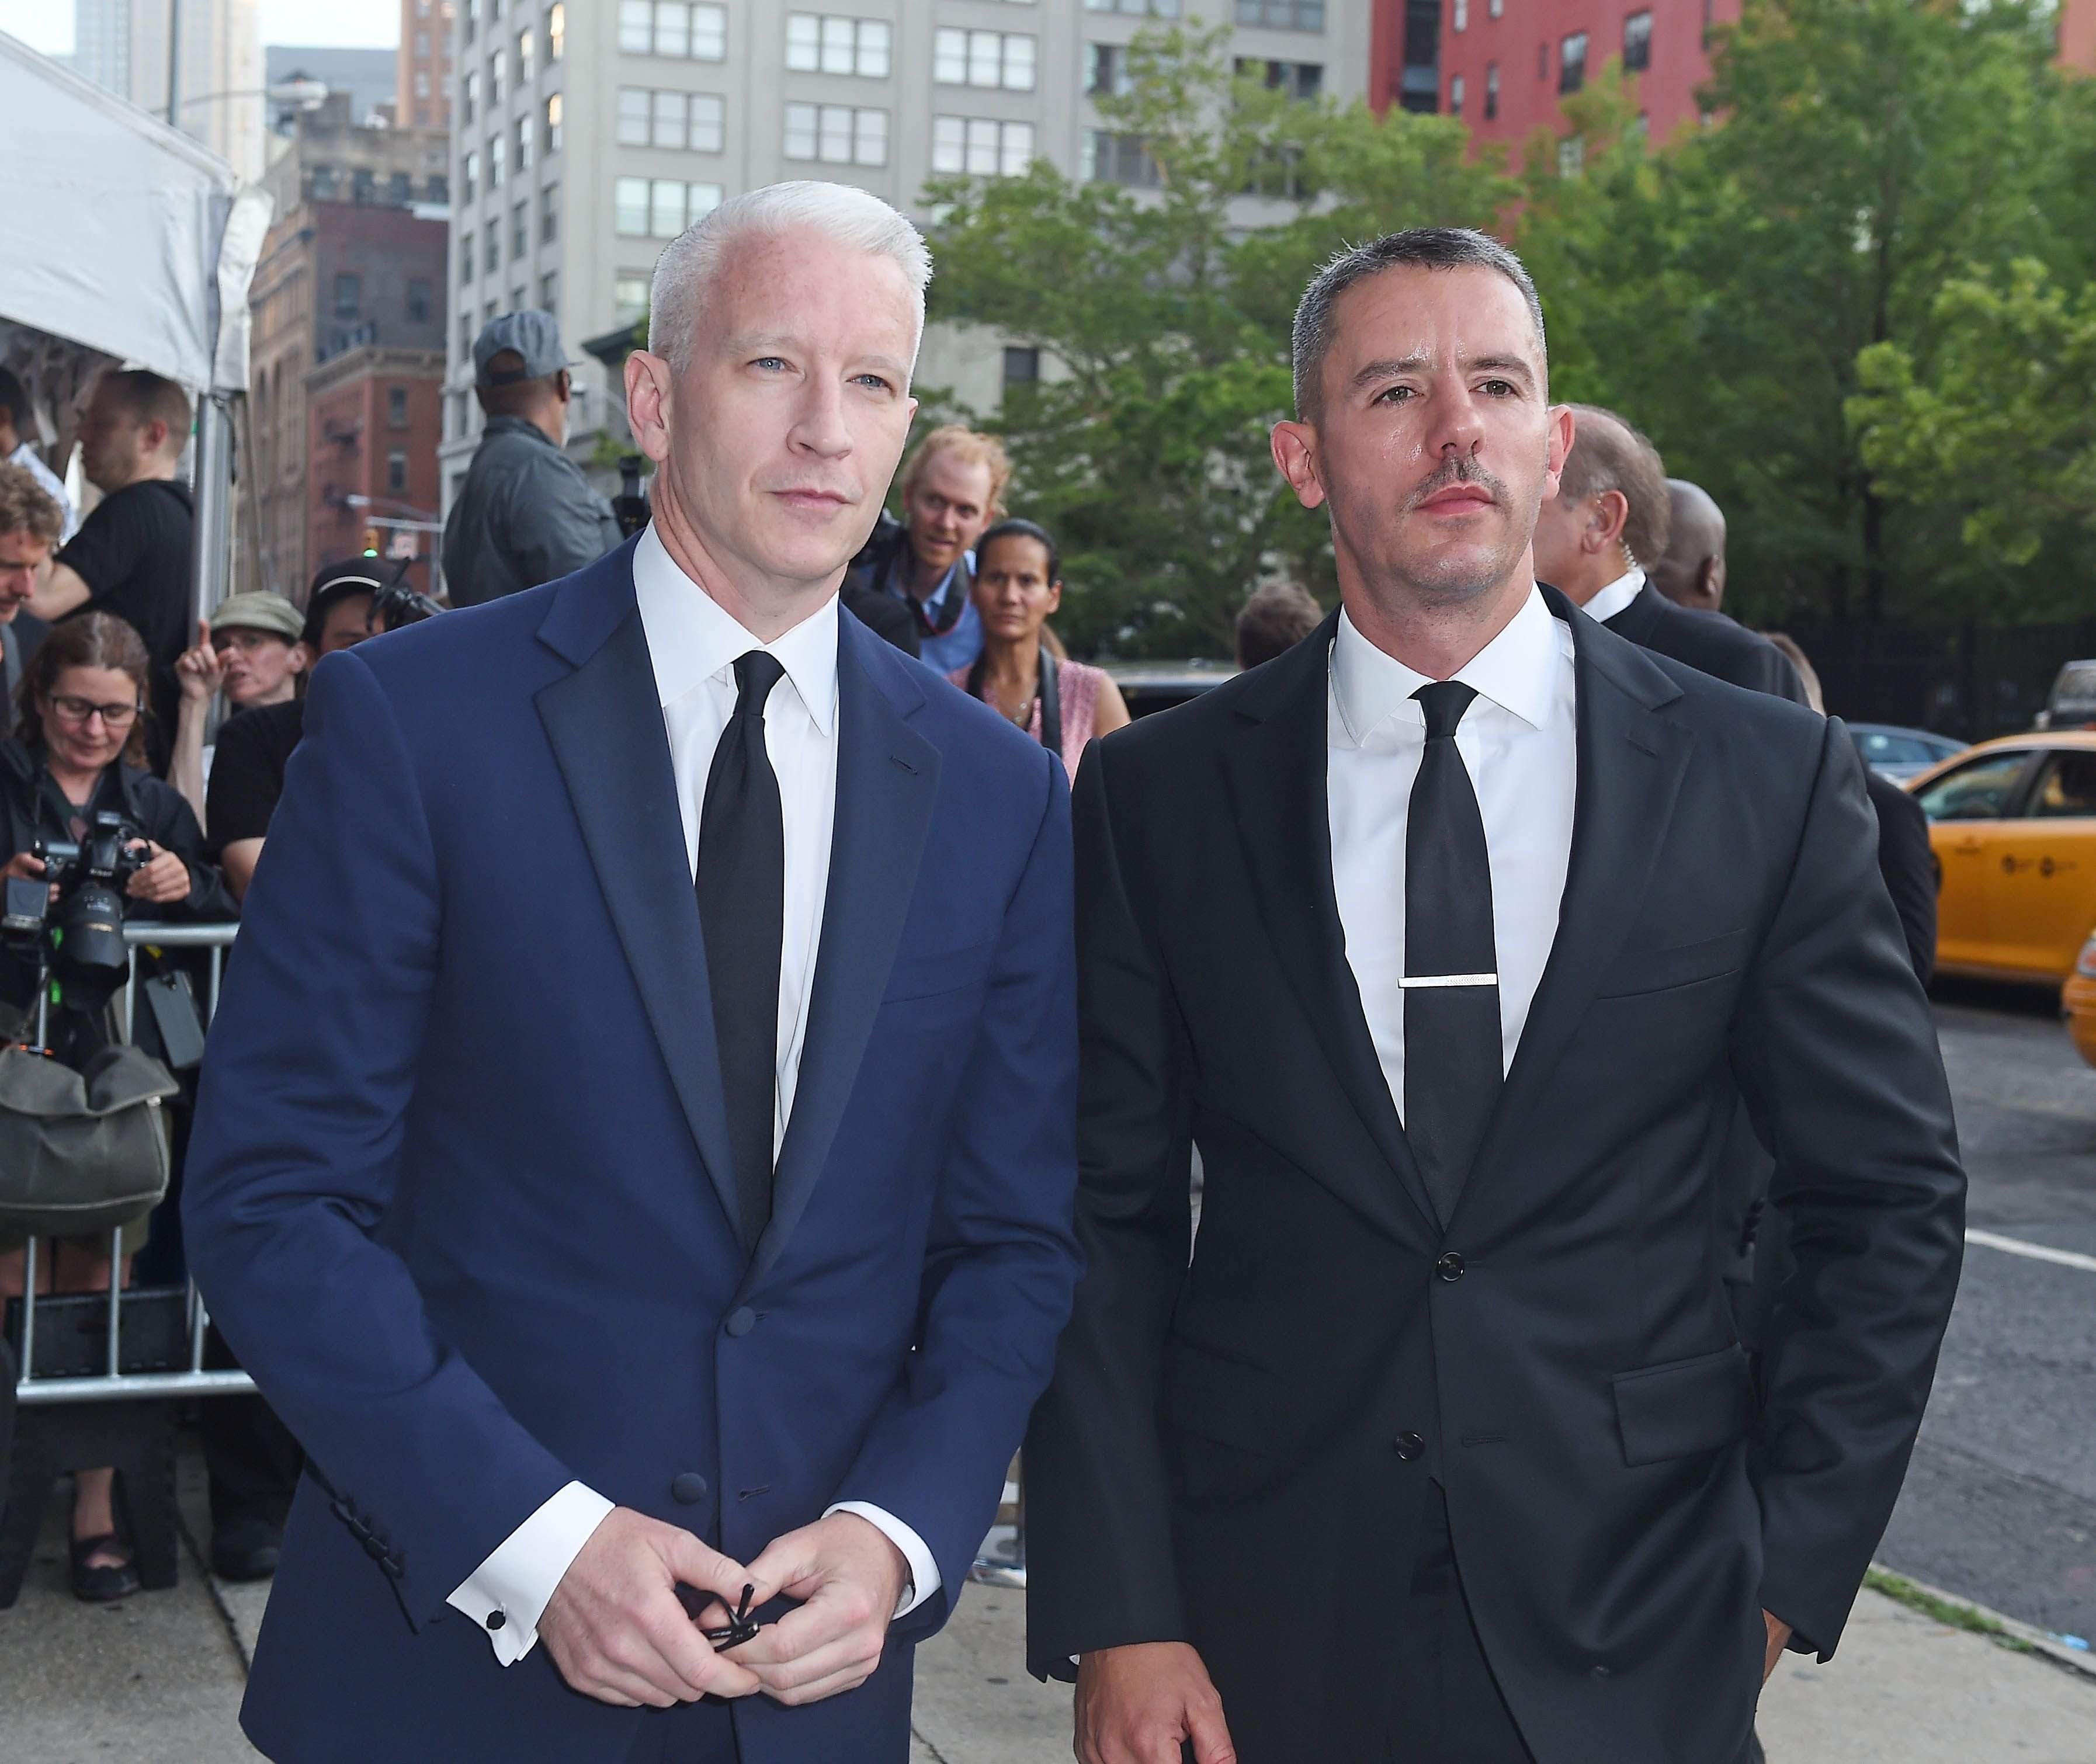 Anderson Cooper and Benjamin Maisani seen arriving at the amfAR Inspiration Gala on June 16, 2015, in New York City | Photo: NCP/Star Max/GC Images/Getty Images